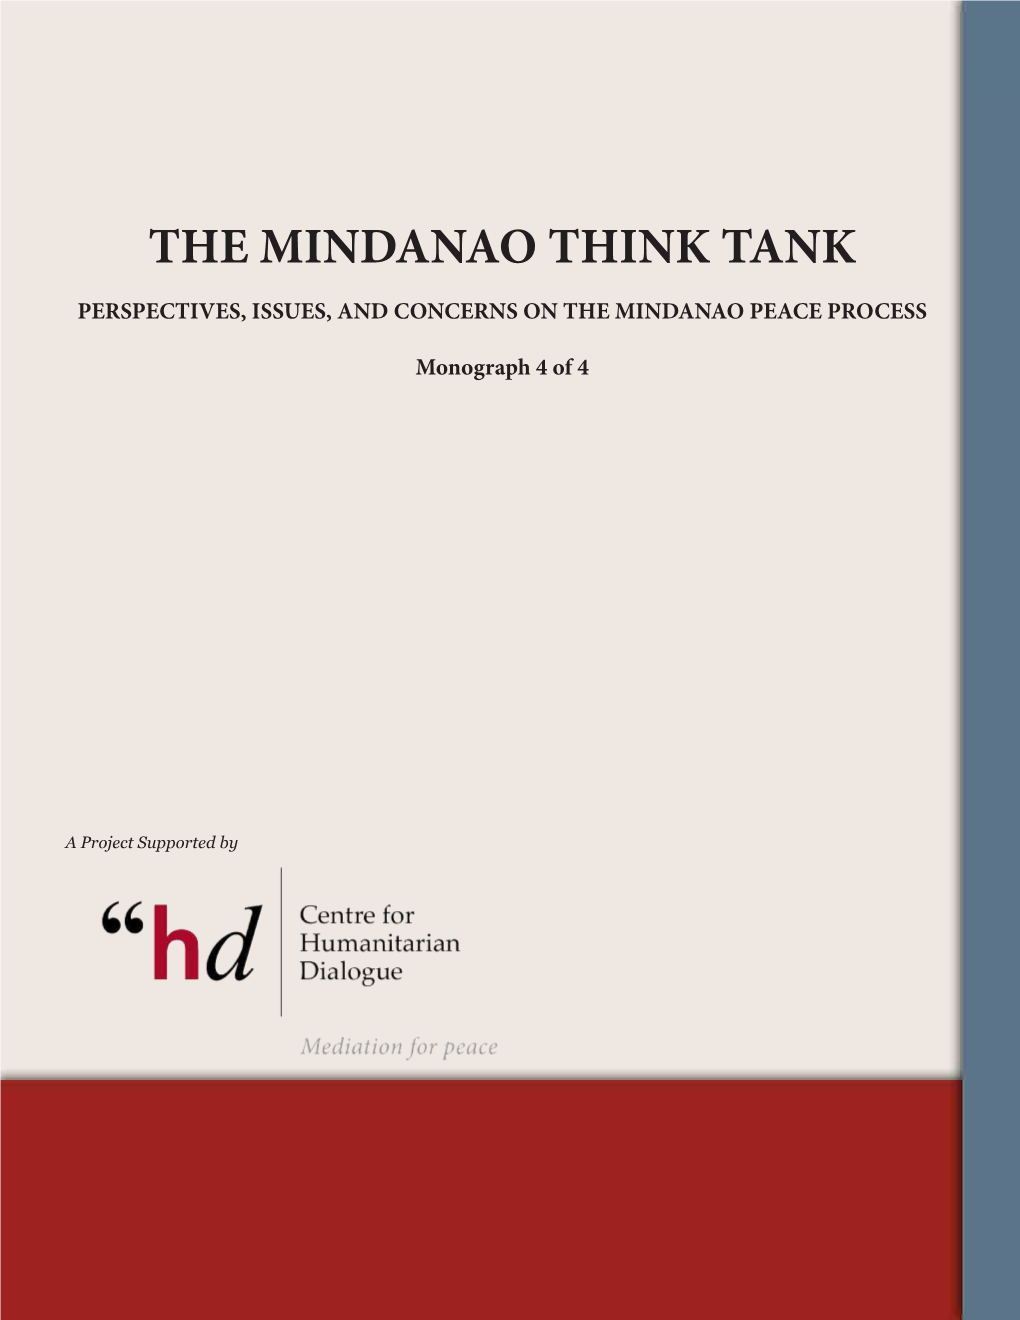 The Mindanao Think Tank Perspectives, Issues, and Concerns on the Mindanao Peace Process